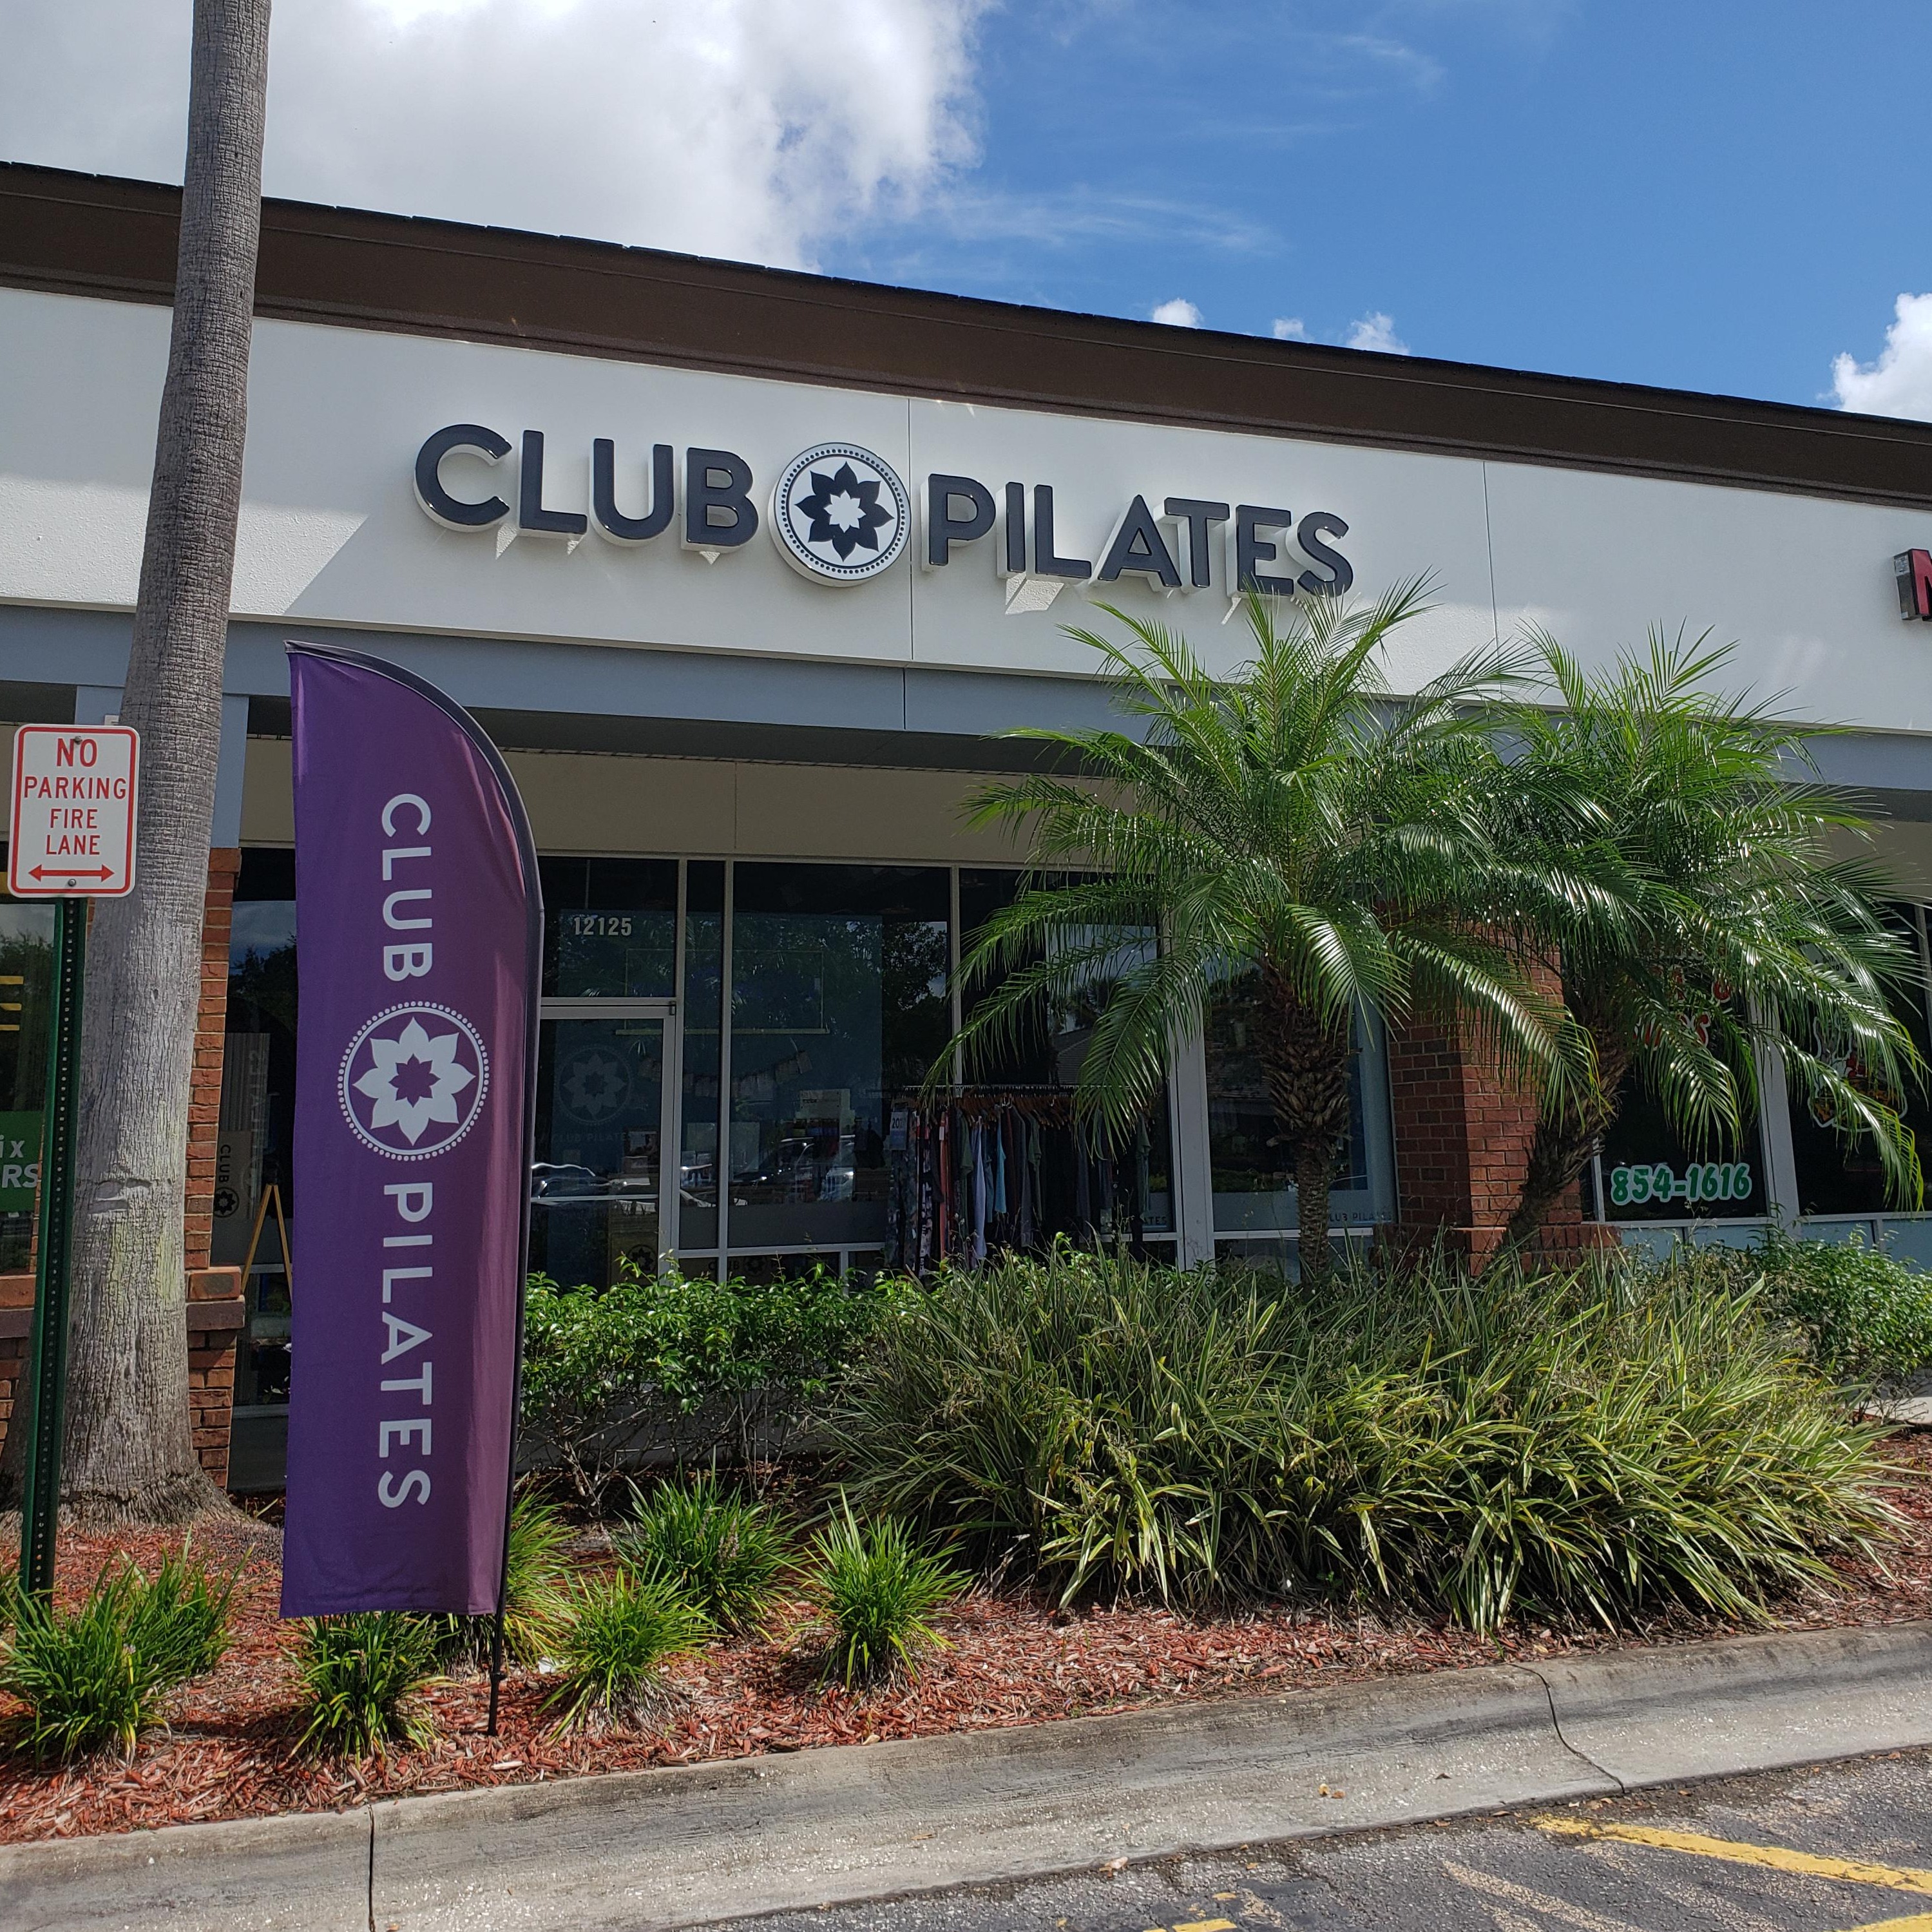 Club Pilates expected to open in West Chester Twp.